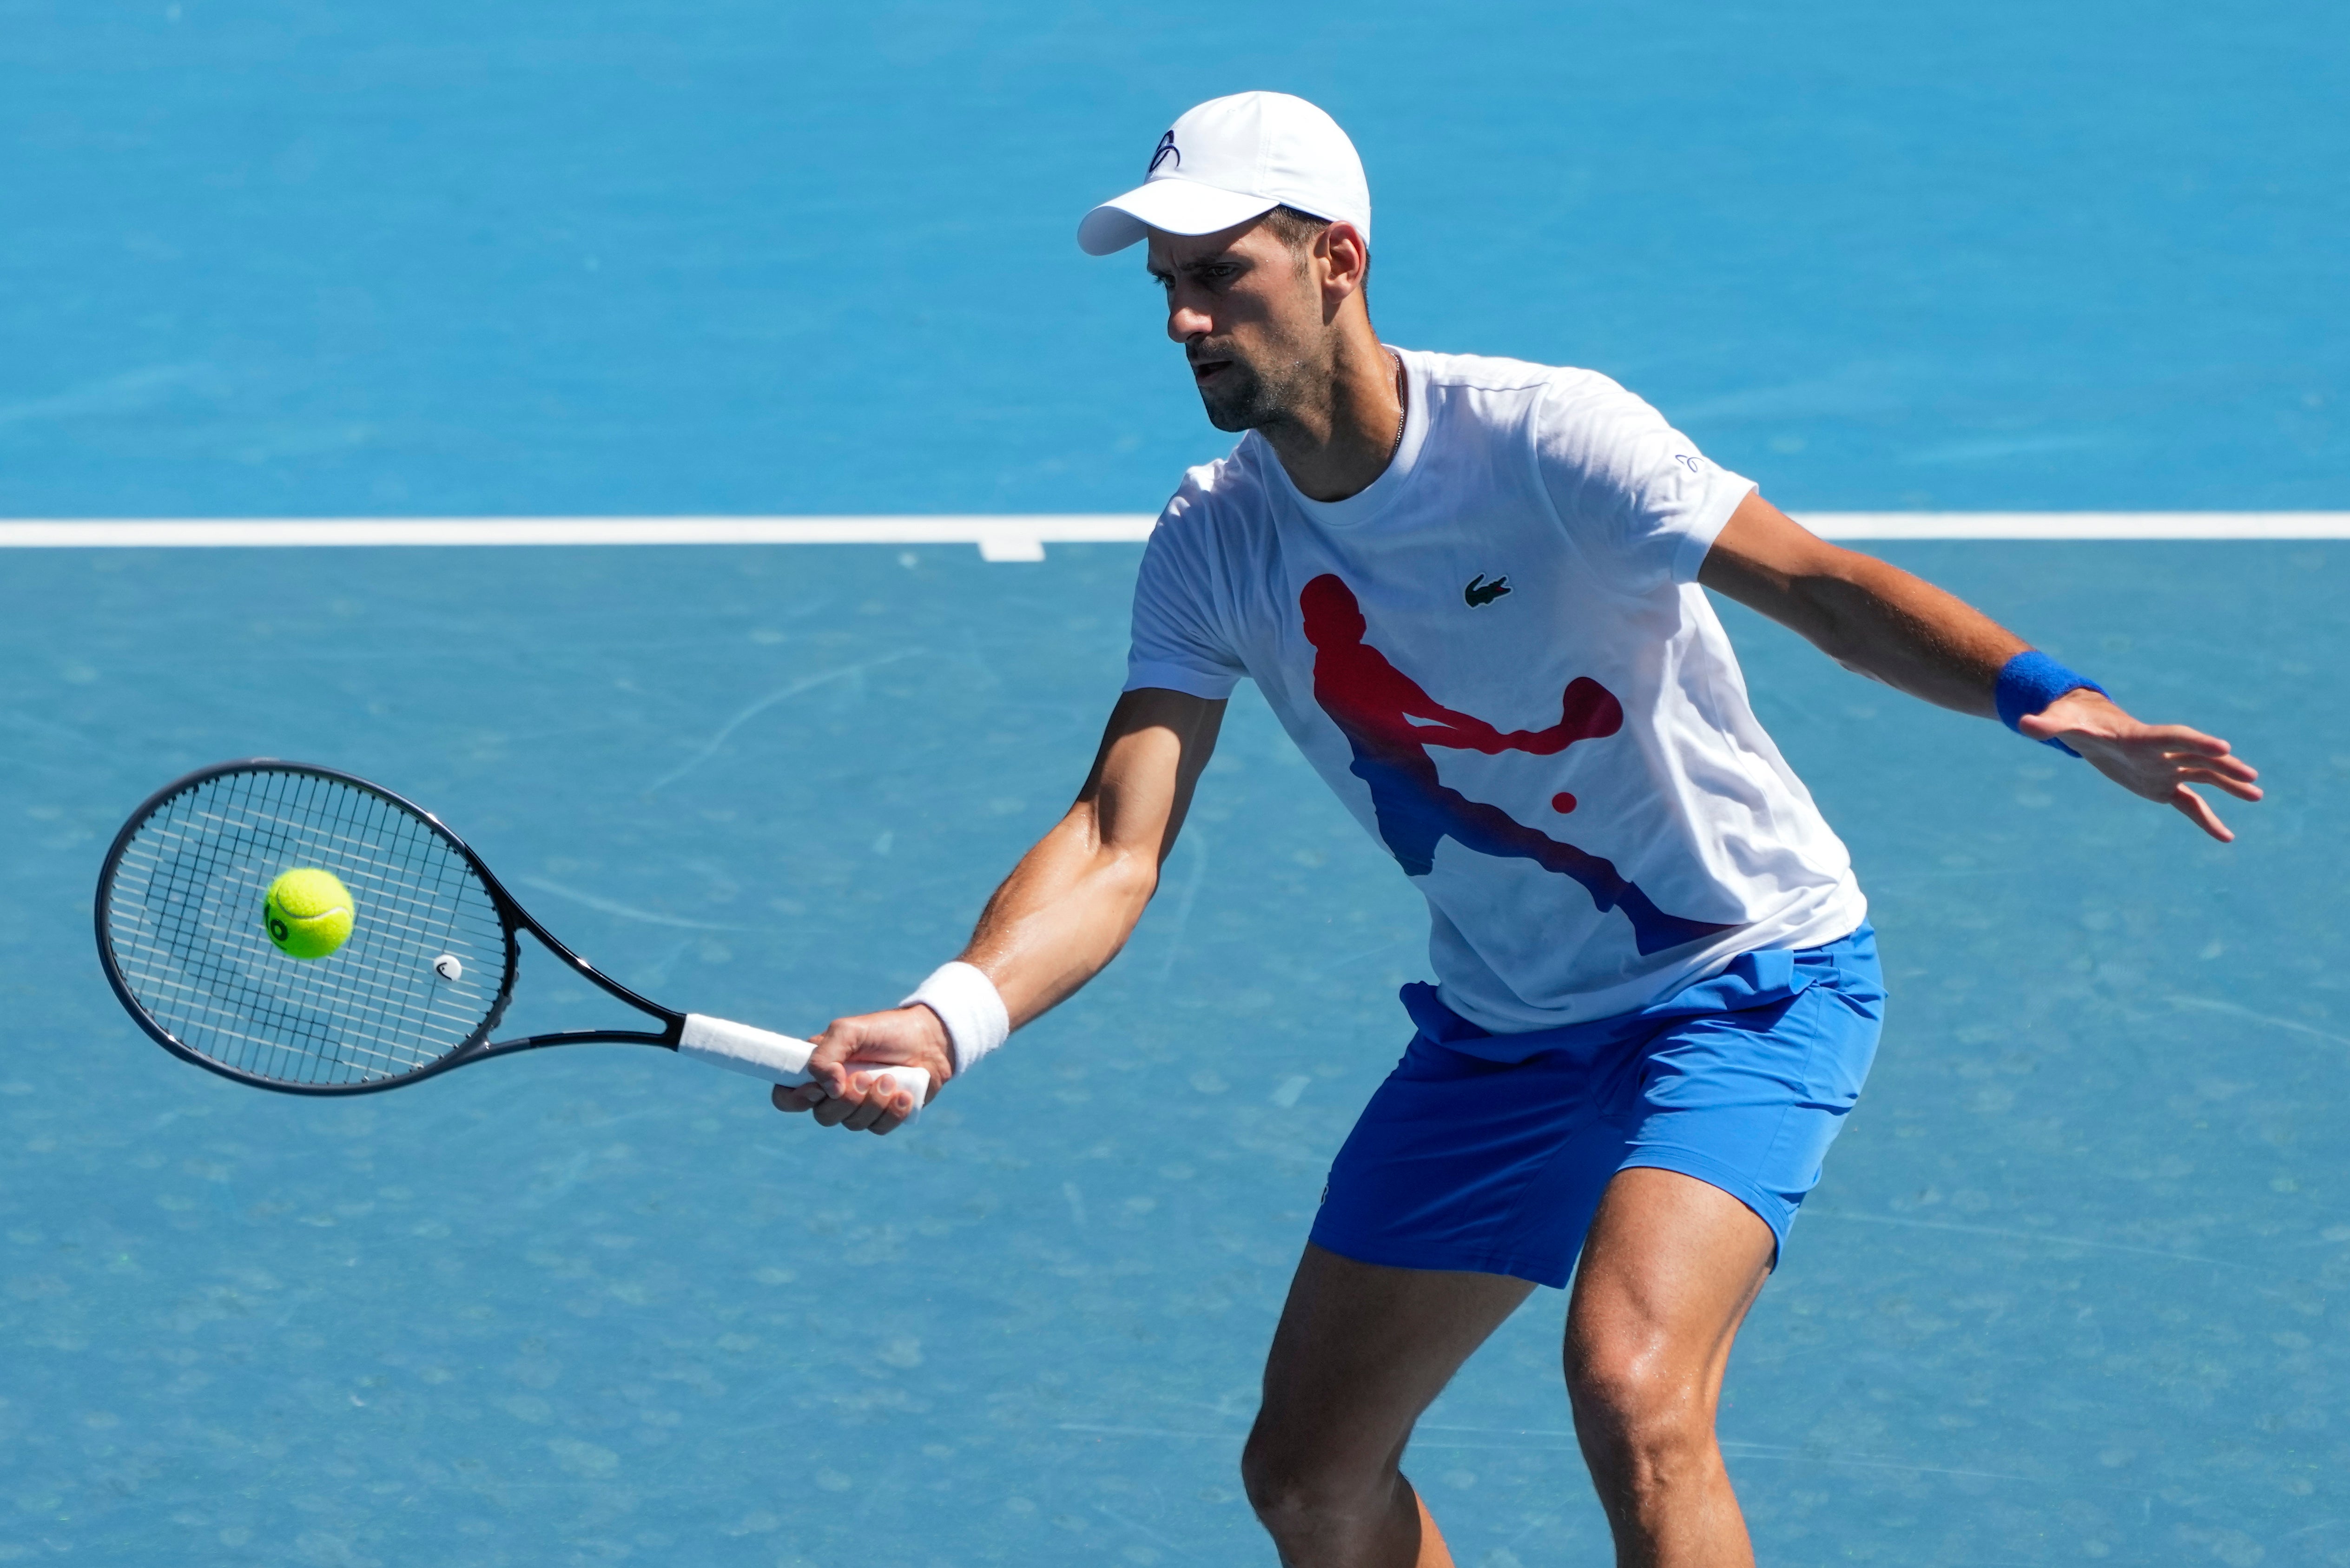 Djokovic is practising well and appears to have shaken off a wrist injury ahead of the Australian Open